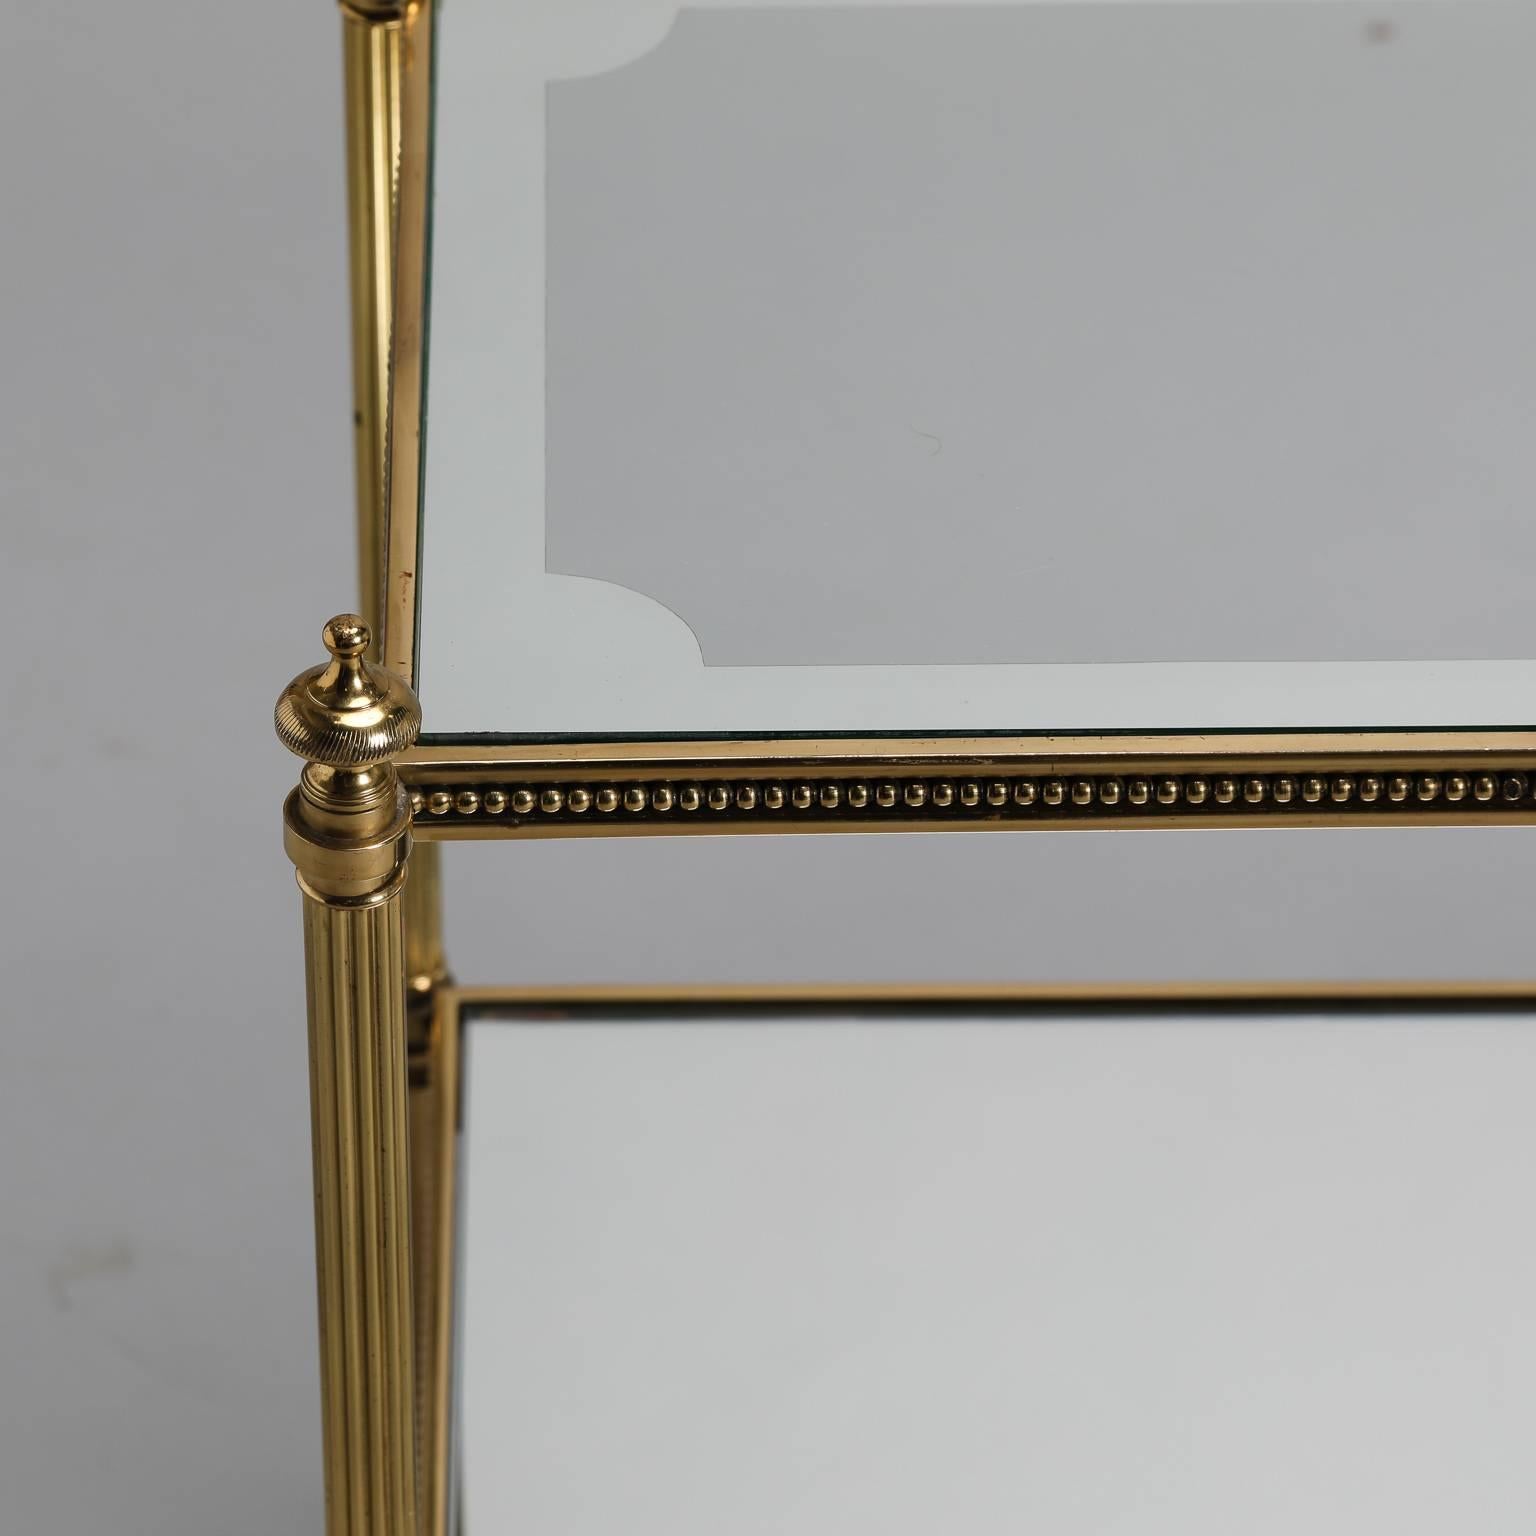 Mid-Century pair of Italian brass, glass and mirrored glass side tables date from the 1960s with neoclassical styling. Two-tier square tables have fluted brass legs, decorative finials and beading and glass table tops with wide, decorative dark